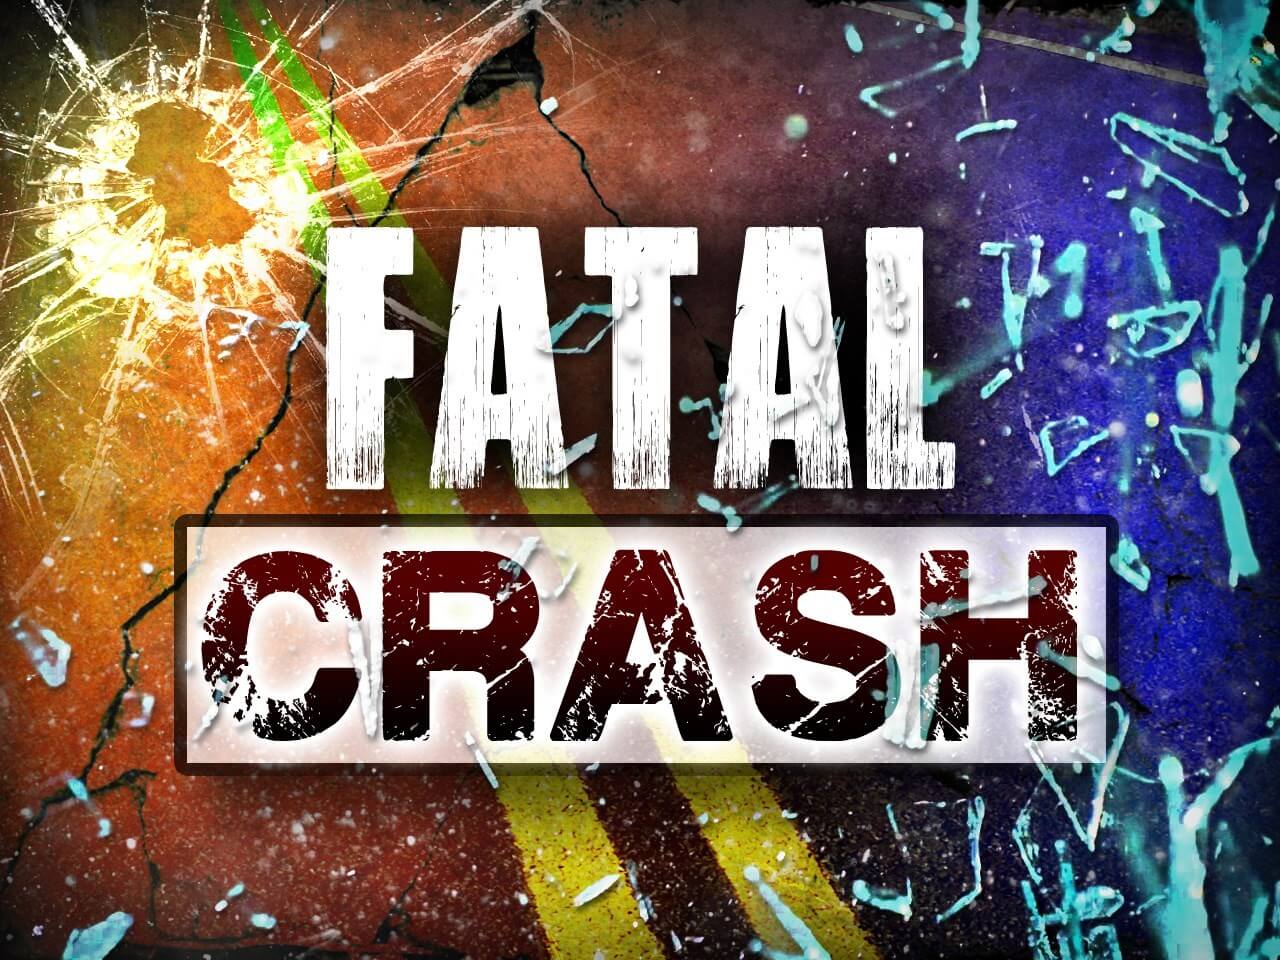 Ripley woman killed by driver who was under influence over weekend